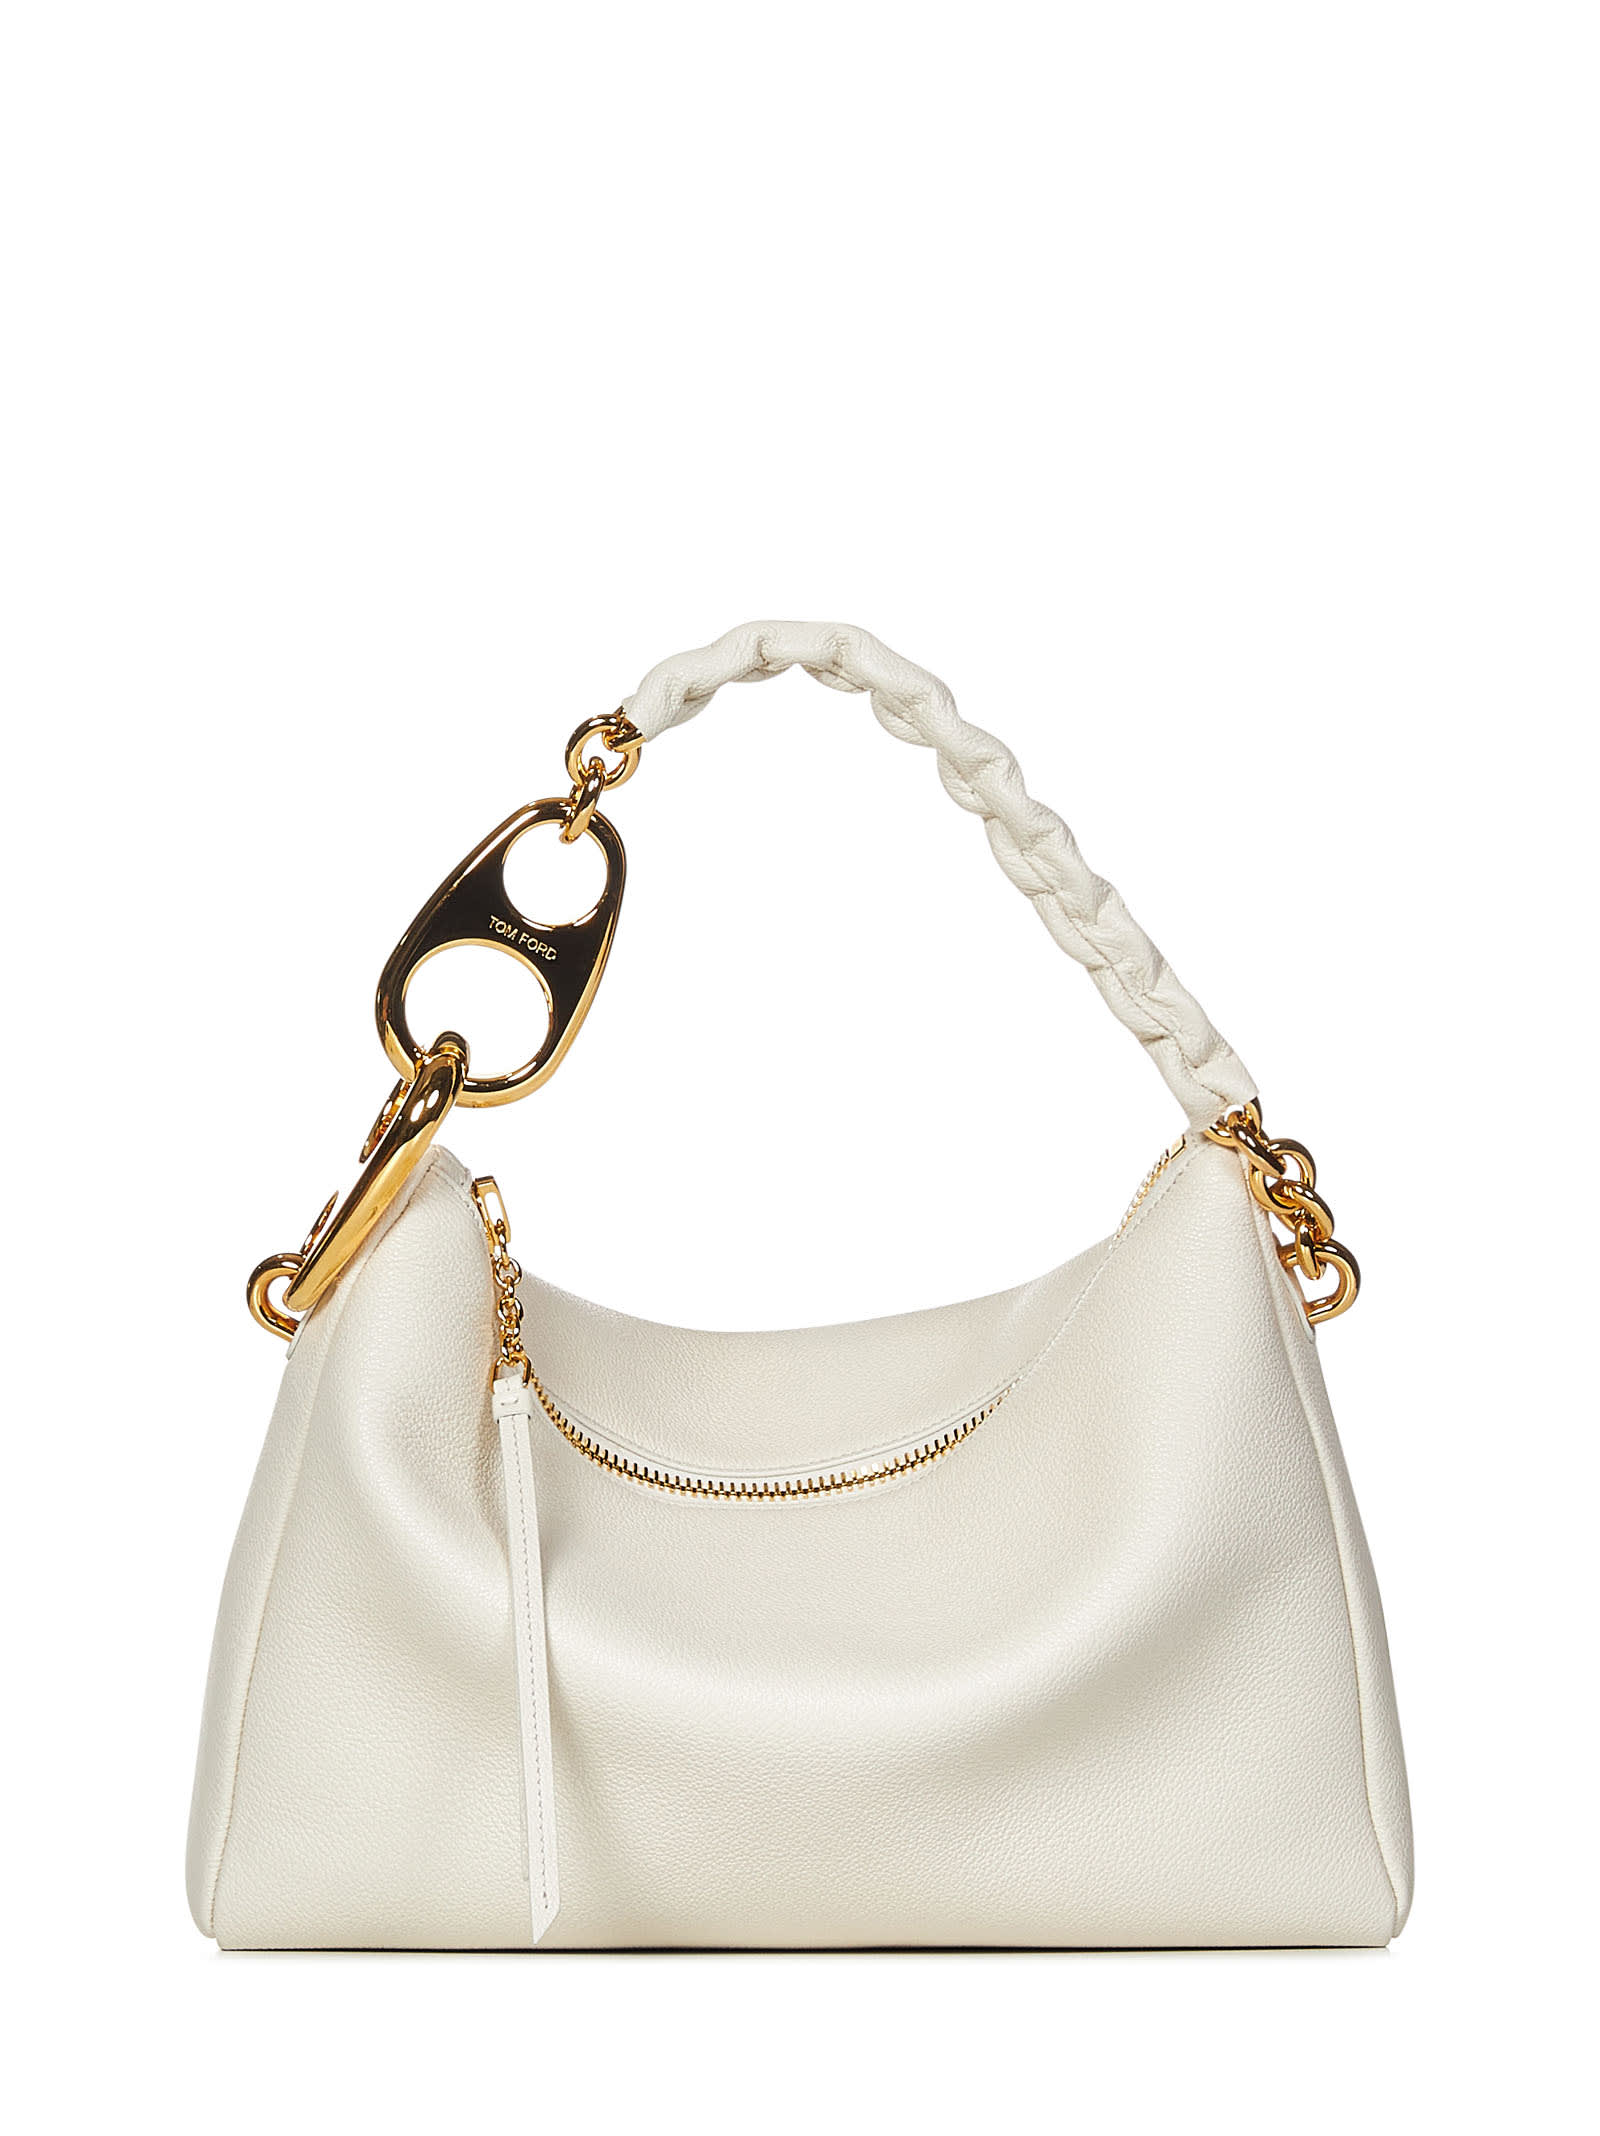 Tom Ford Carine Large Shiny Leather Hobo Bag In White